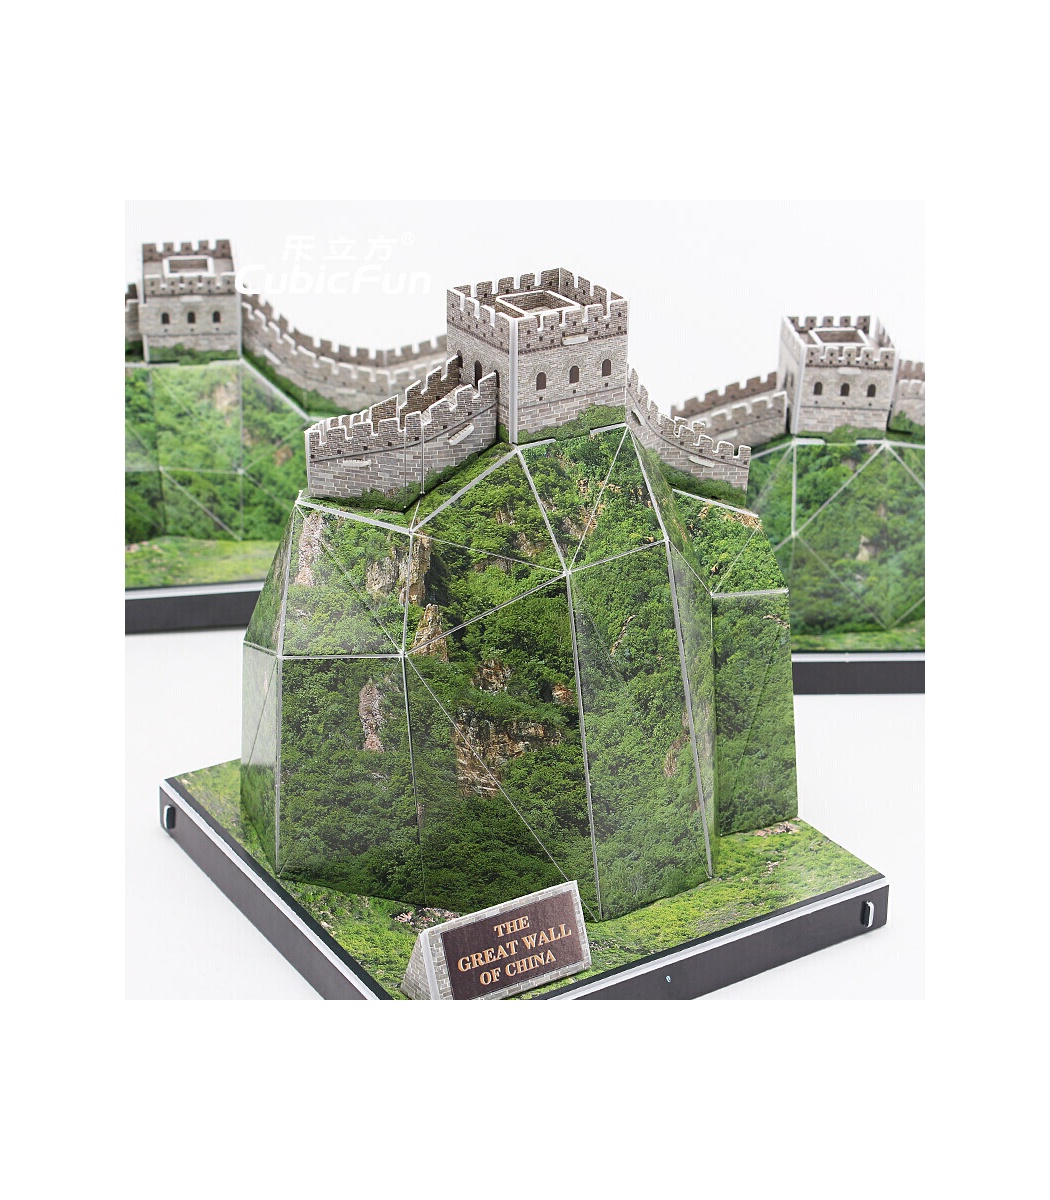 3D Puzzle Great Wall Chinesische Mauer China Groß Cubic Fun 